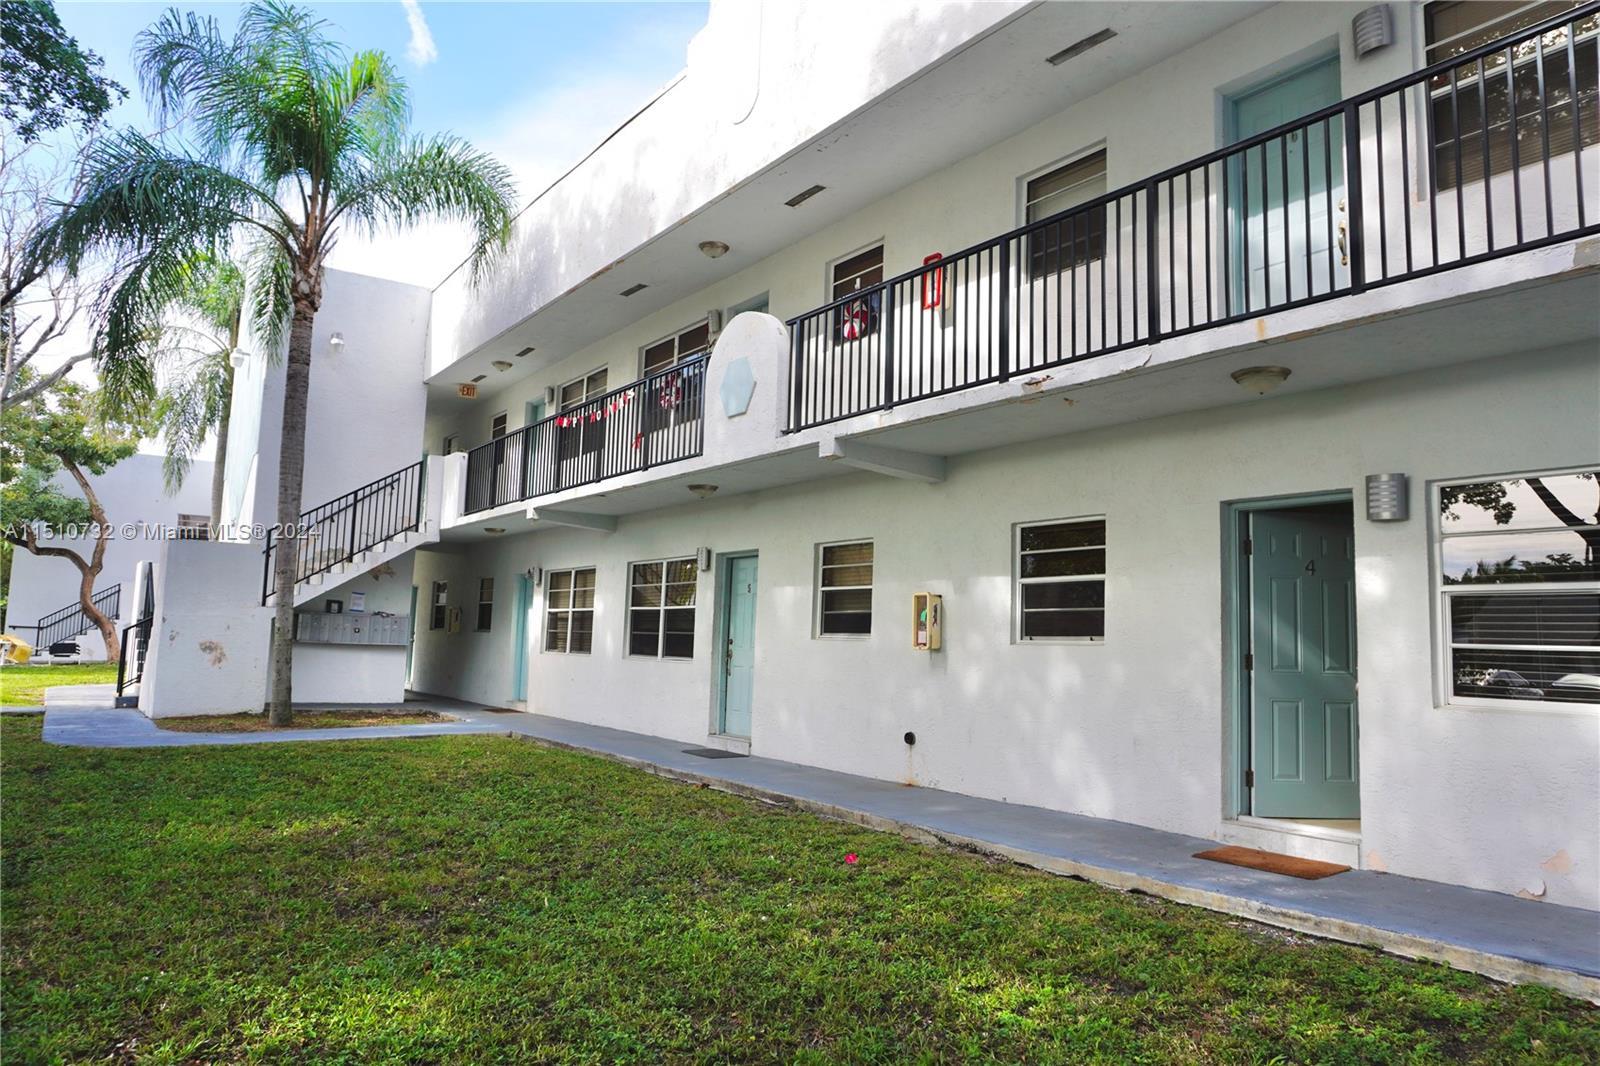 Photo of 1925 Madison St #4 in Hollywood, FL